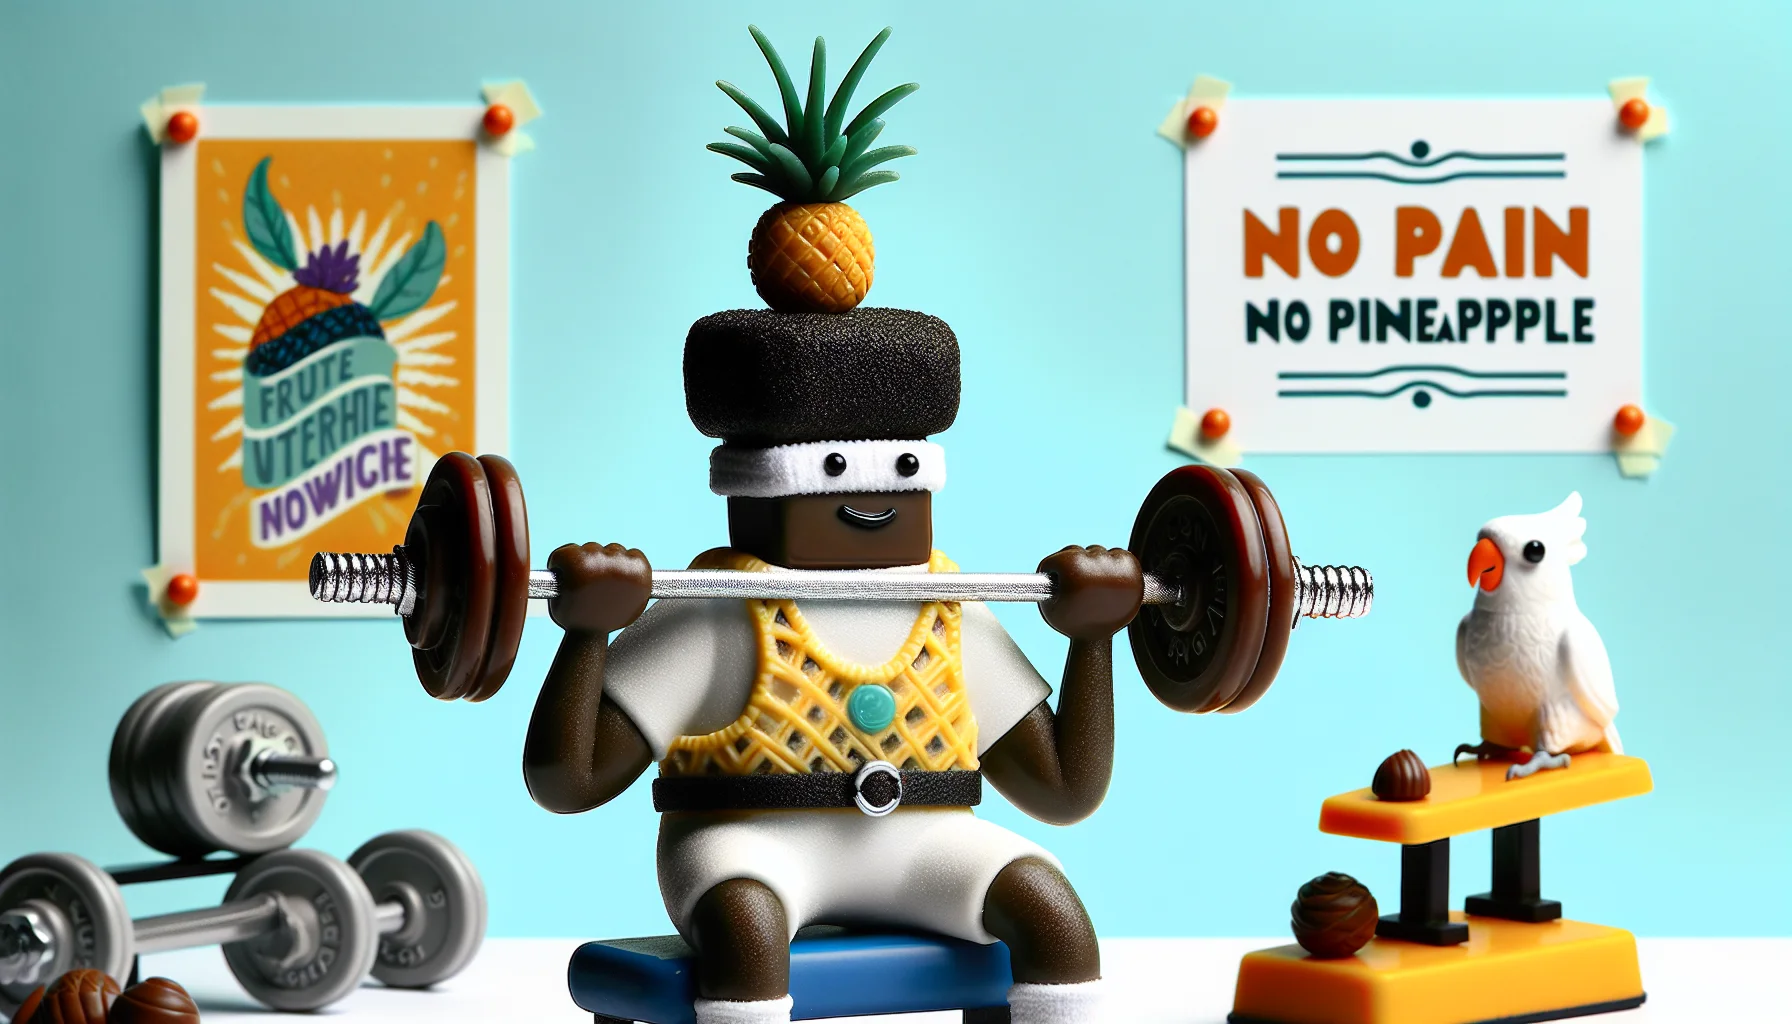 Craft a humorous image that features a Black female performing a dumbbell French press in a playful workout environment. She maintains a concentrated expression while attempting to balance a small pineapple on her head. The dumbbell appears to be made from chocolate instead of iron. Behind her, a white parrot appears to be mimicking her movements with a tiny dumbbell of its own, and a banner displaying a motivating slogan 'No pain, No pineapple' hangs on the workout room wall.